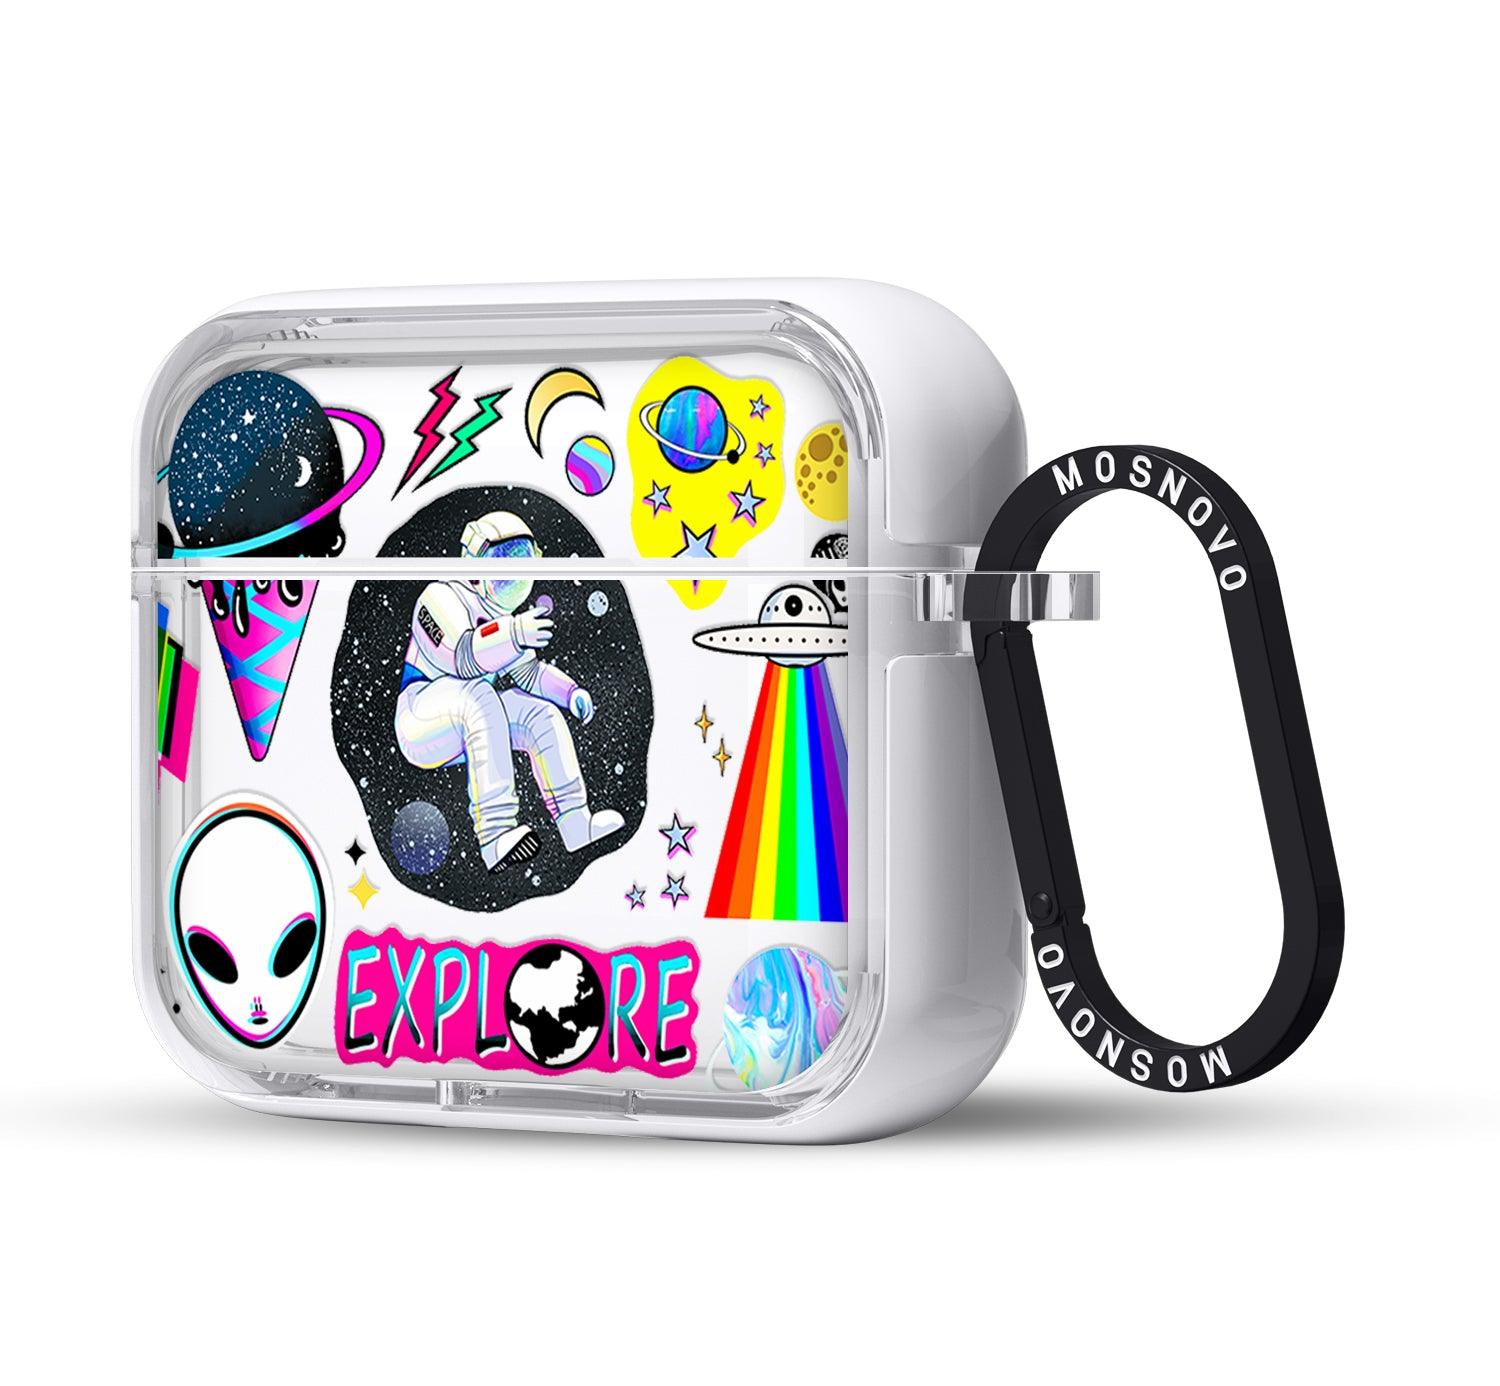 Sci-Fi Stickers AirPods 3 Case (3rd Generation) - MOSNOVO